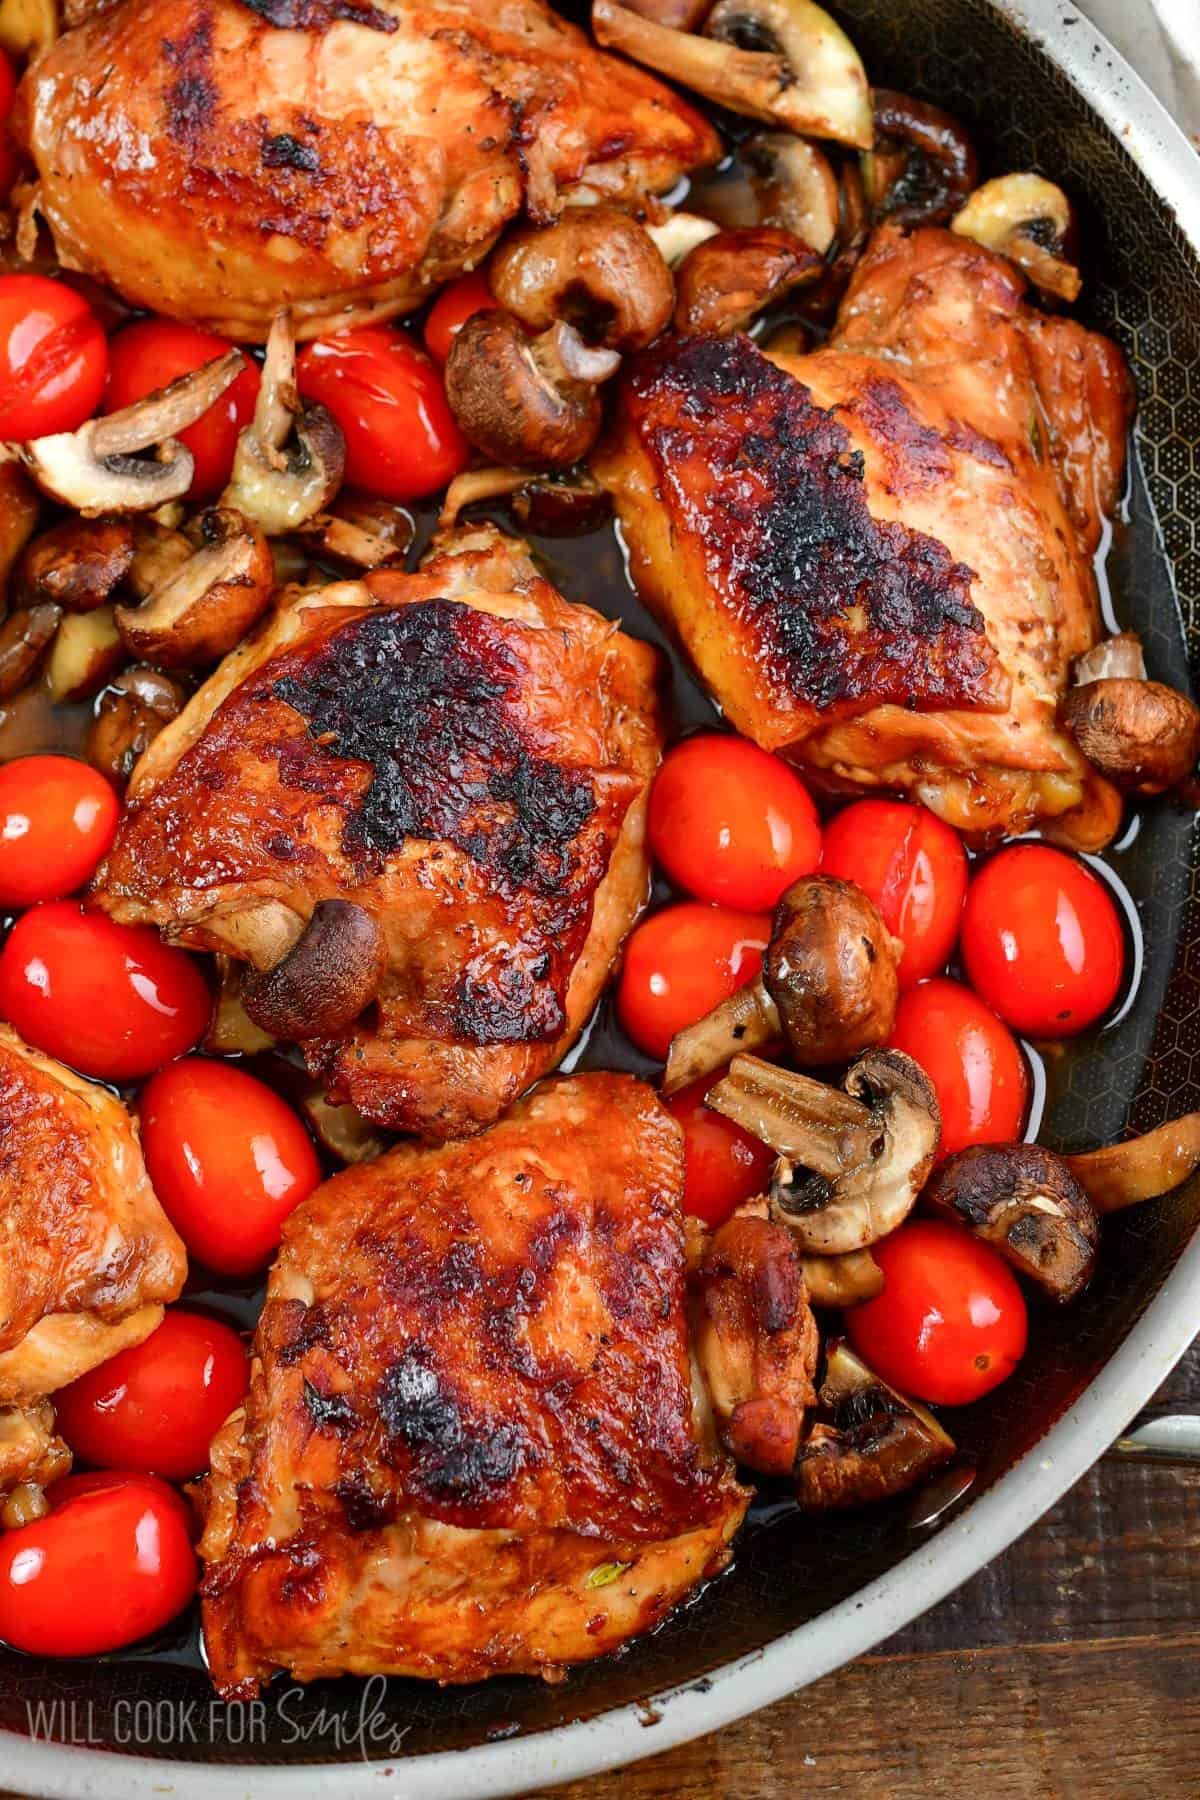 Chicken thighs in a pan baked with mushrooms and cherry tomatoes.